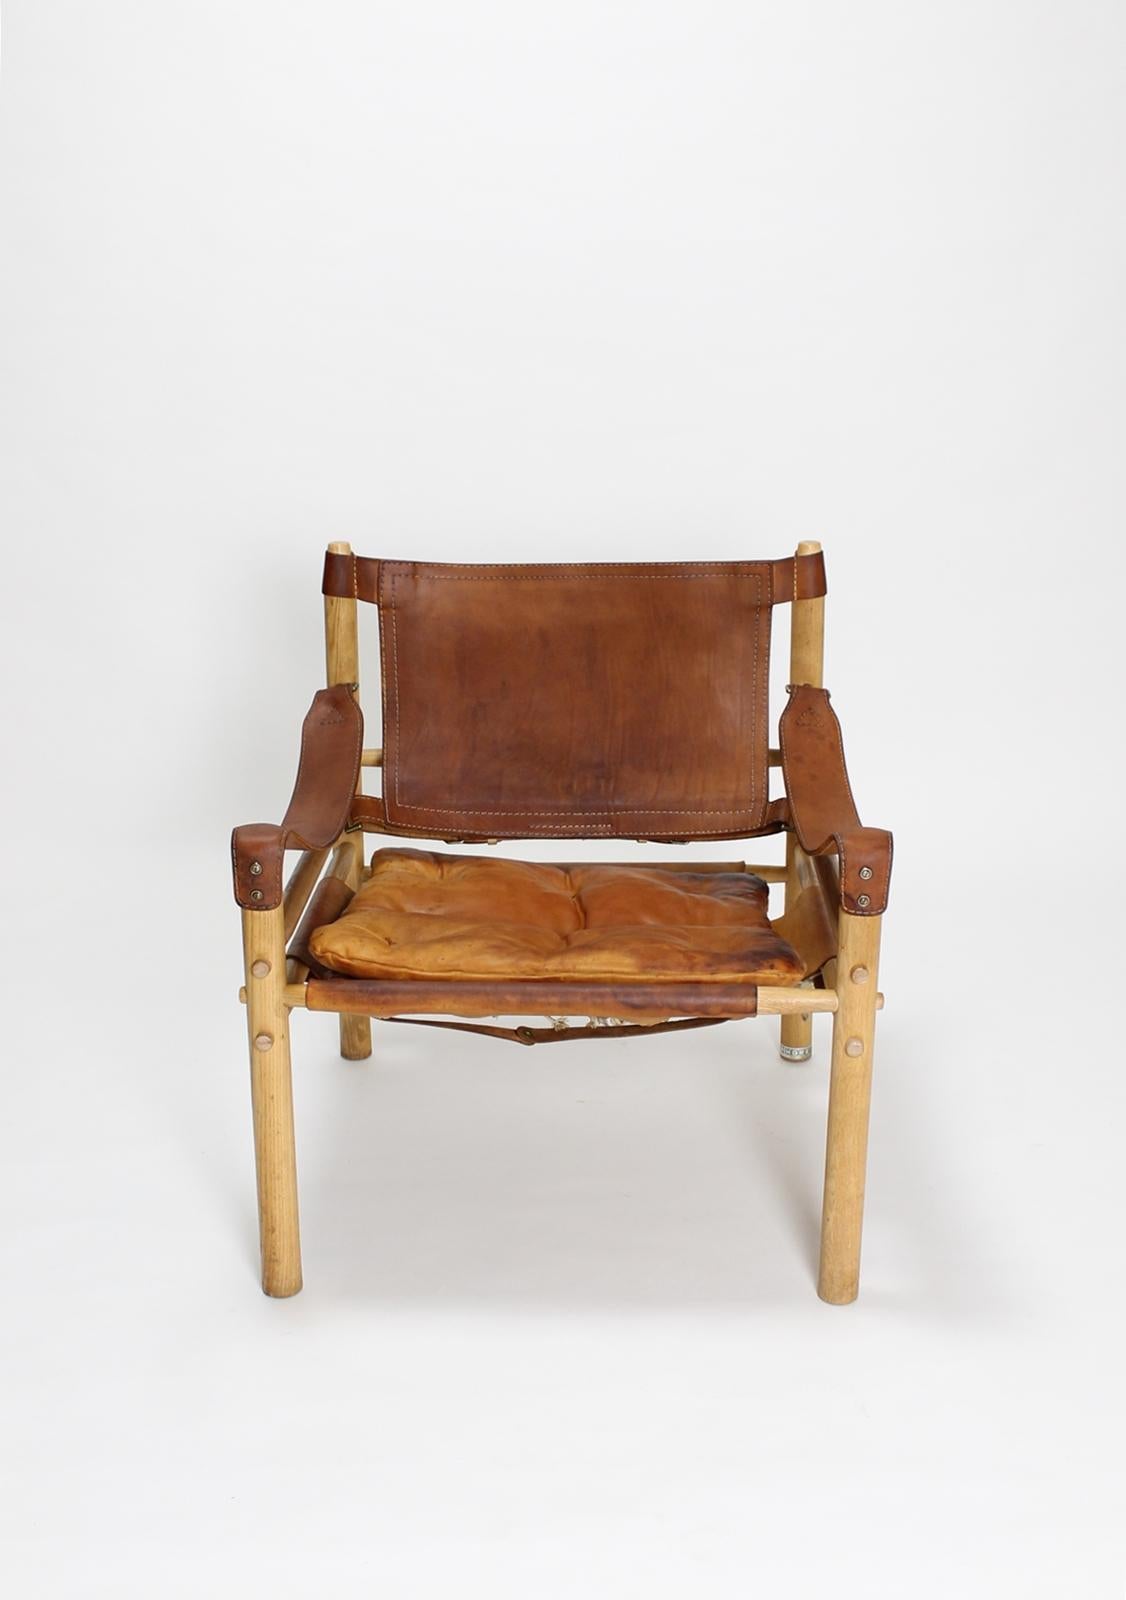 The vintage Swedish midcentury Sirocco Safari chair designed by Arne Norell and produced by Aneby in Sweden in the 1970s. Saddle leather with brass buckles in an ash frame. A patina on the leather, a small tear, crack on the pillow.